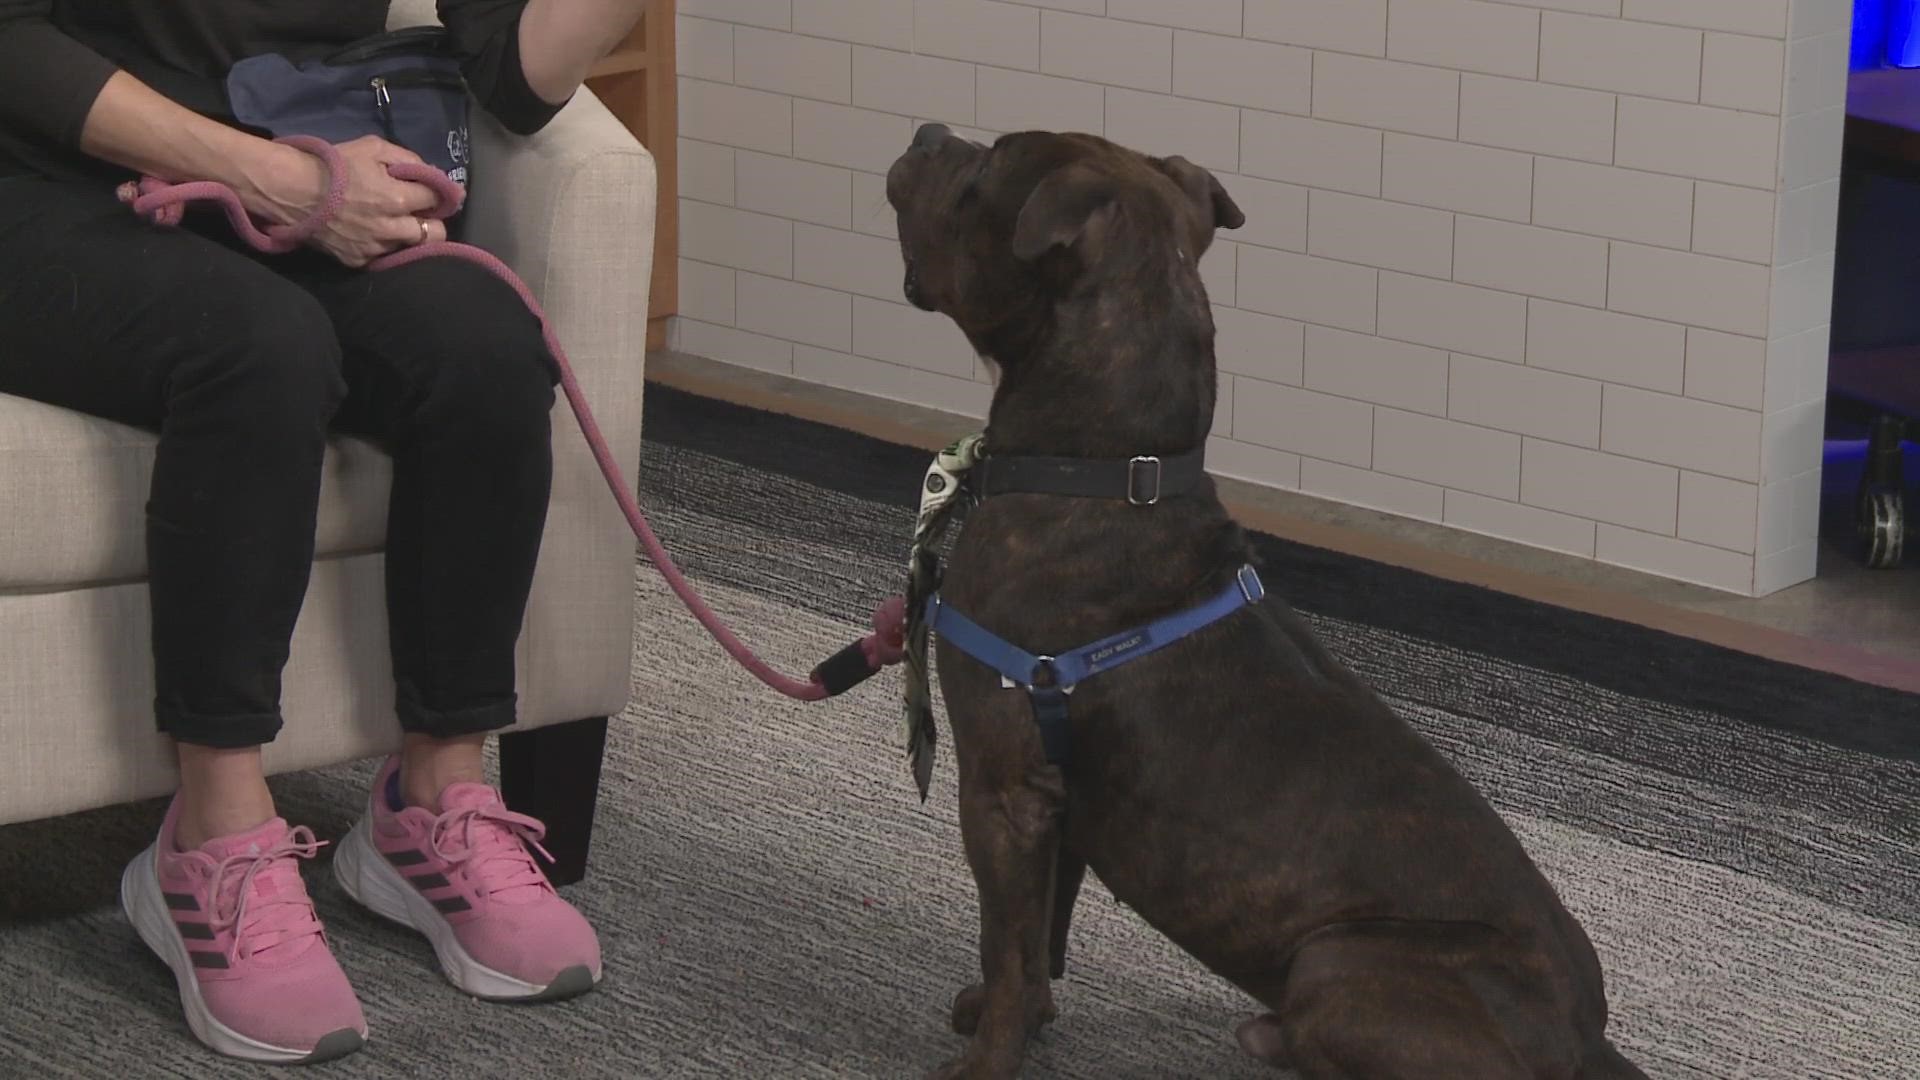 Every week on KVUE Midday, we introduce you to a new animal looking for a forever home. This week, Kimberley with the Austin Animal Center brought in Frankfurt.